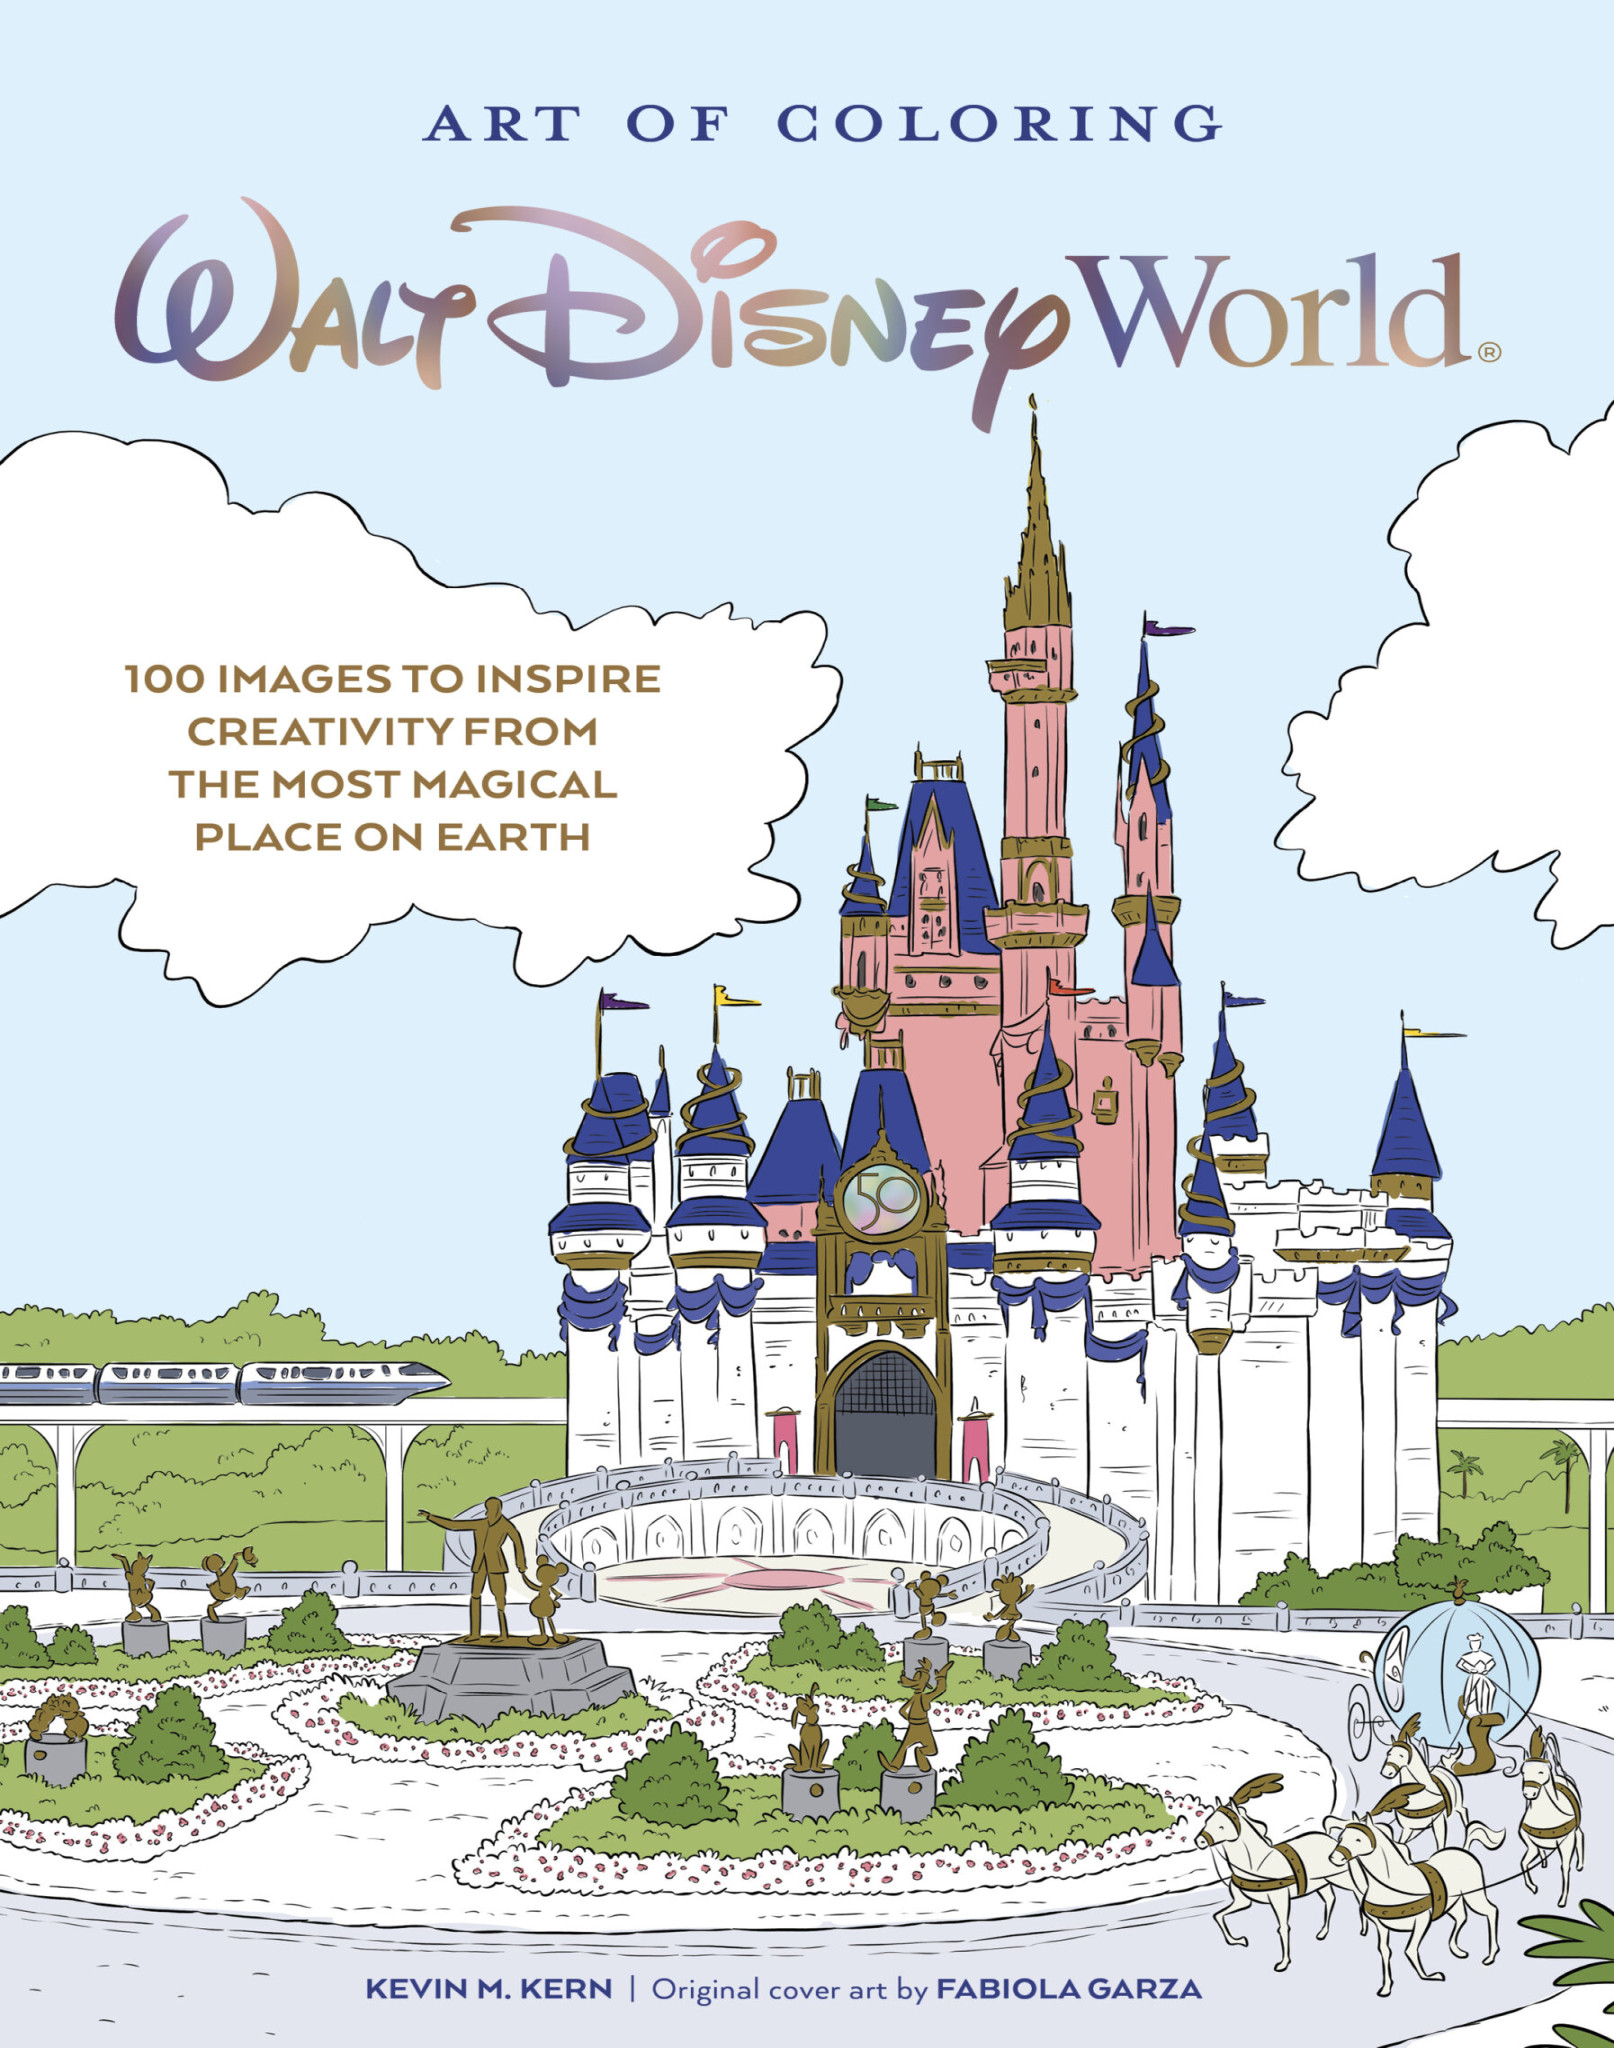 Art of Coloring: Walt Disney World  Images to Inspire